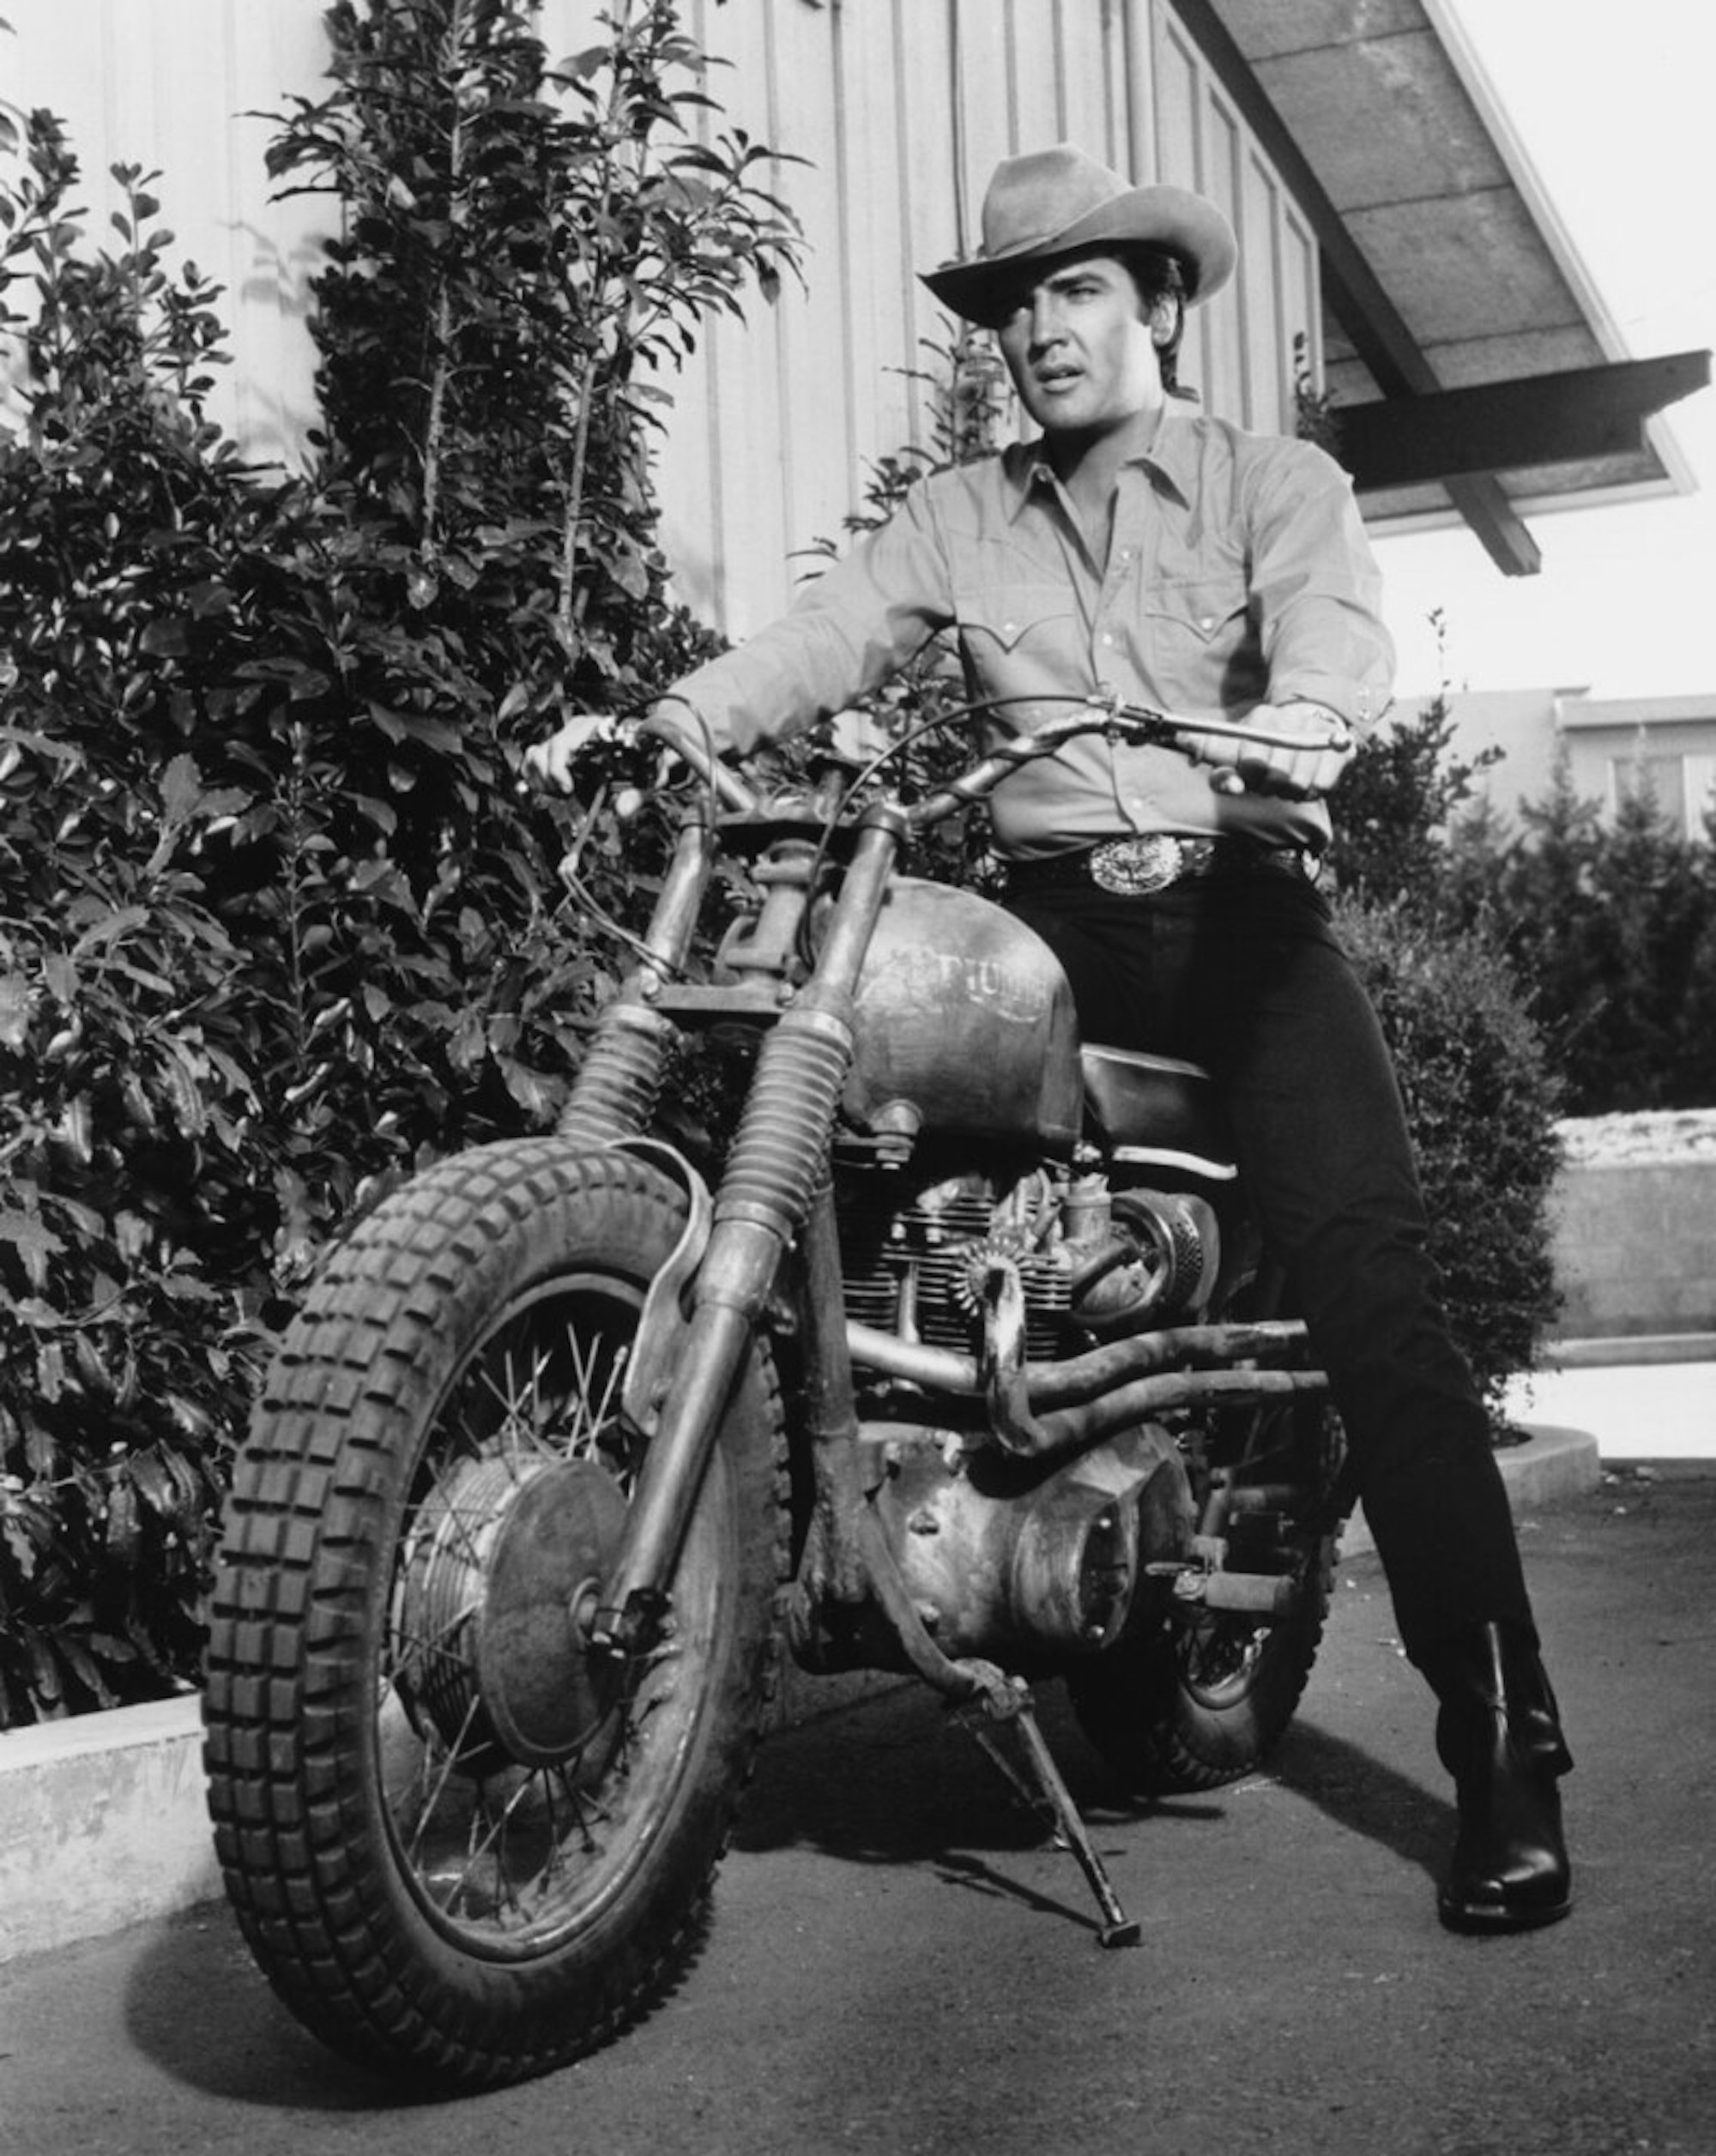 Elvis Presley on a Triumph motorcycle. Media provided by Triumph Motorcycles.